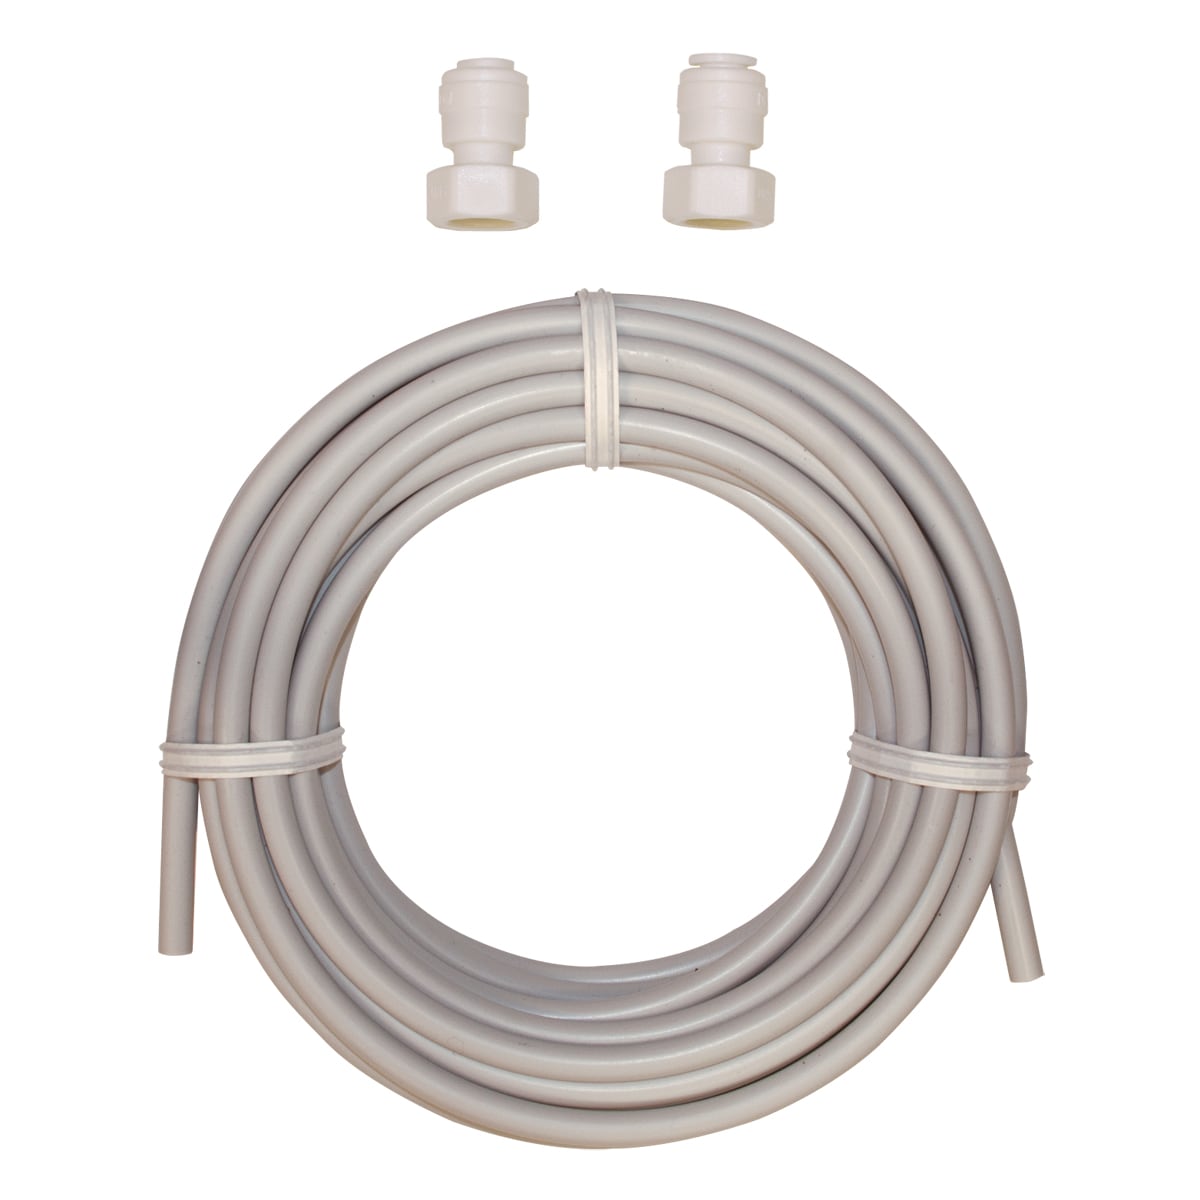 Ice maker connector kit Appliance Supply Lines & Drain Hoses at